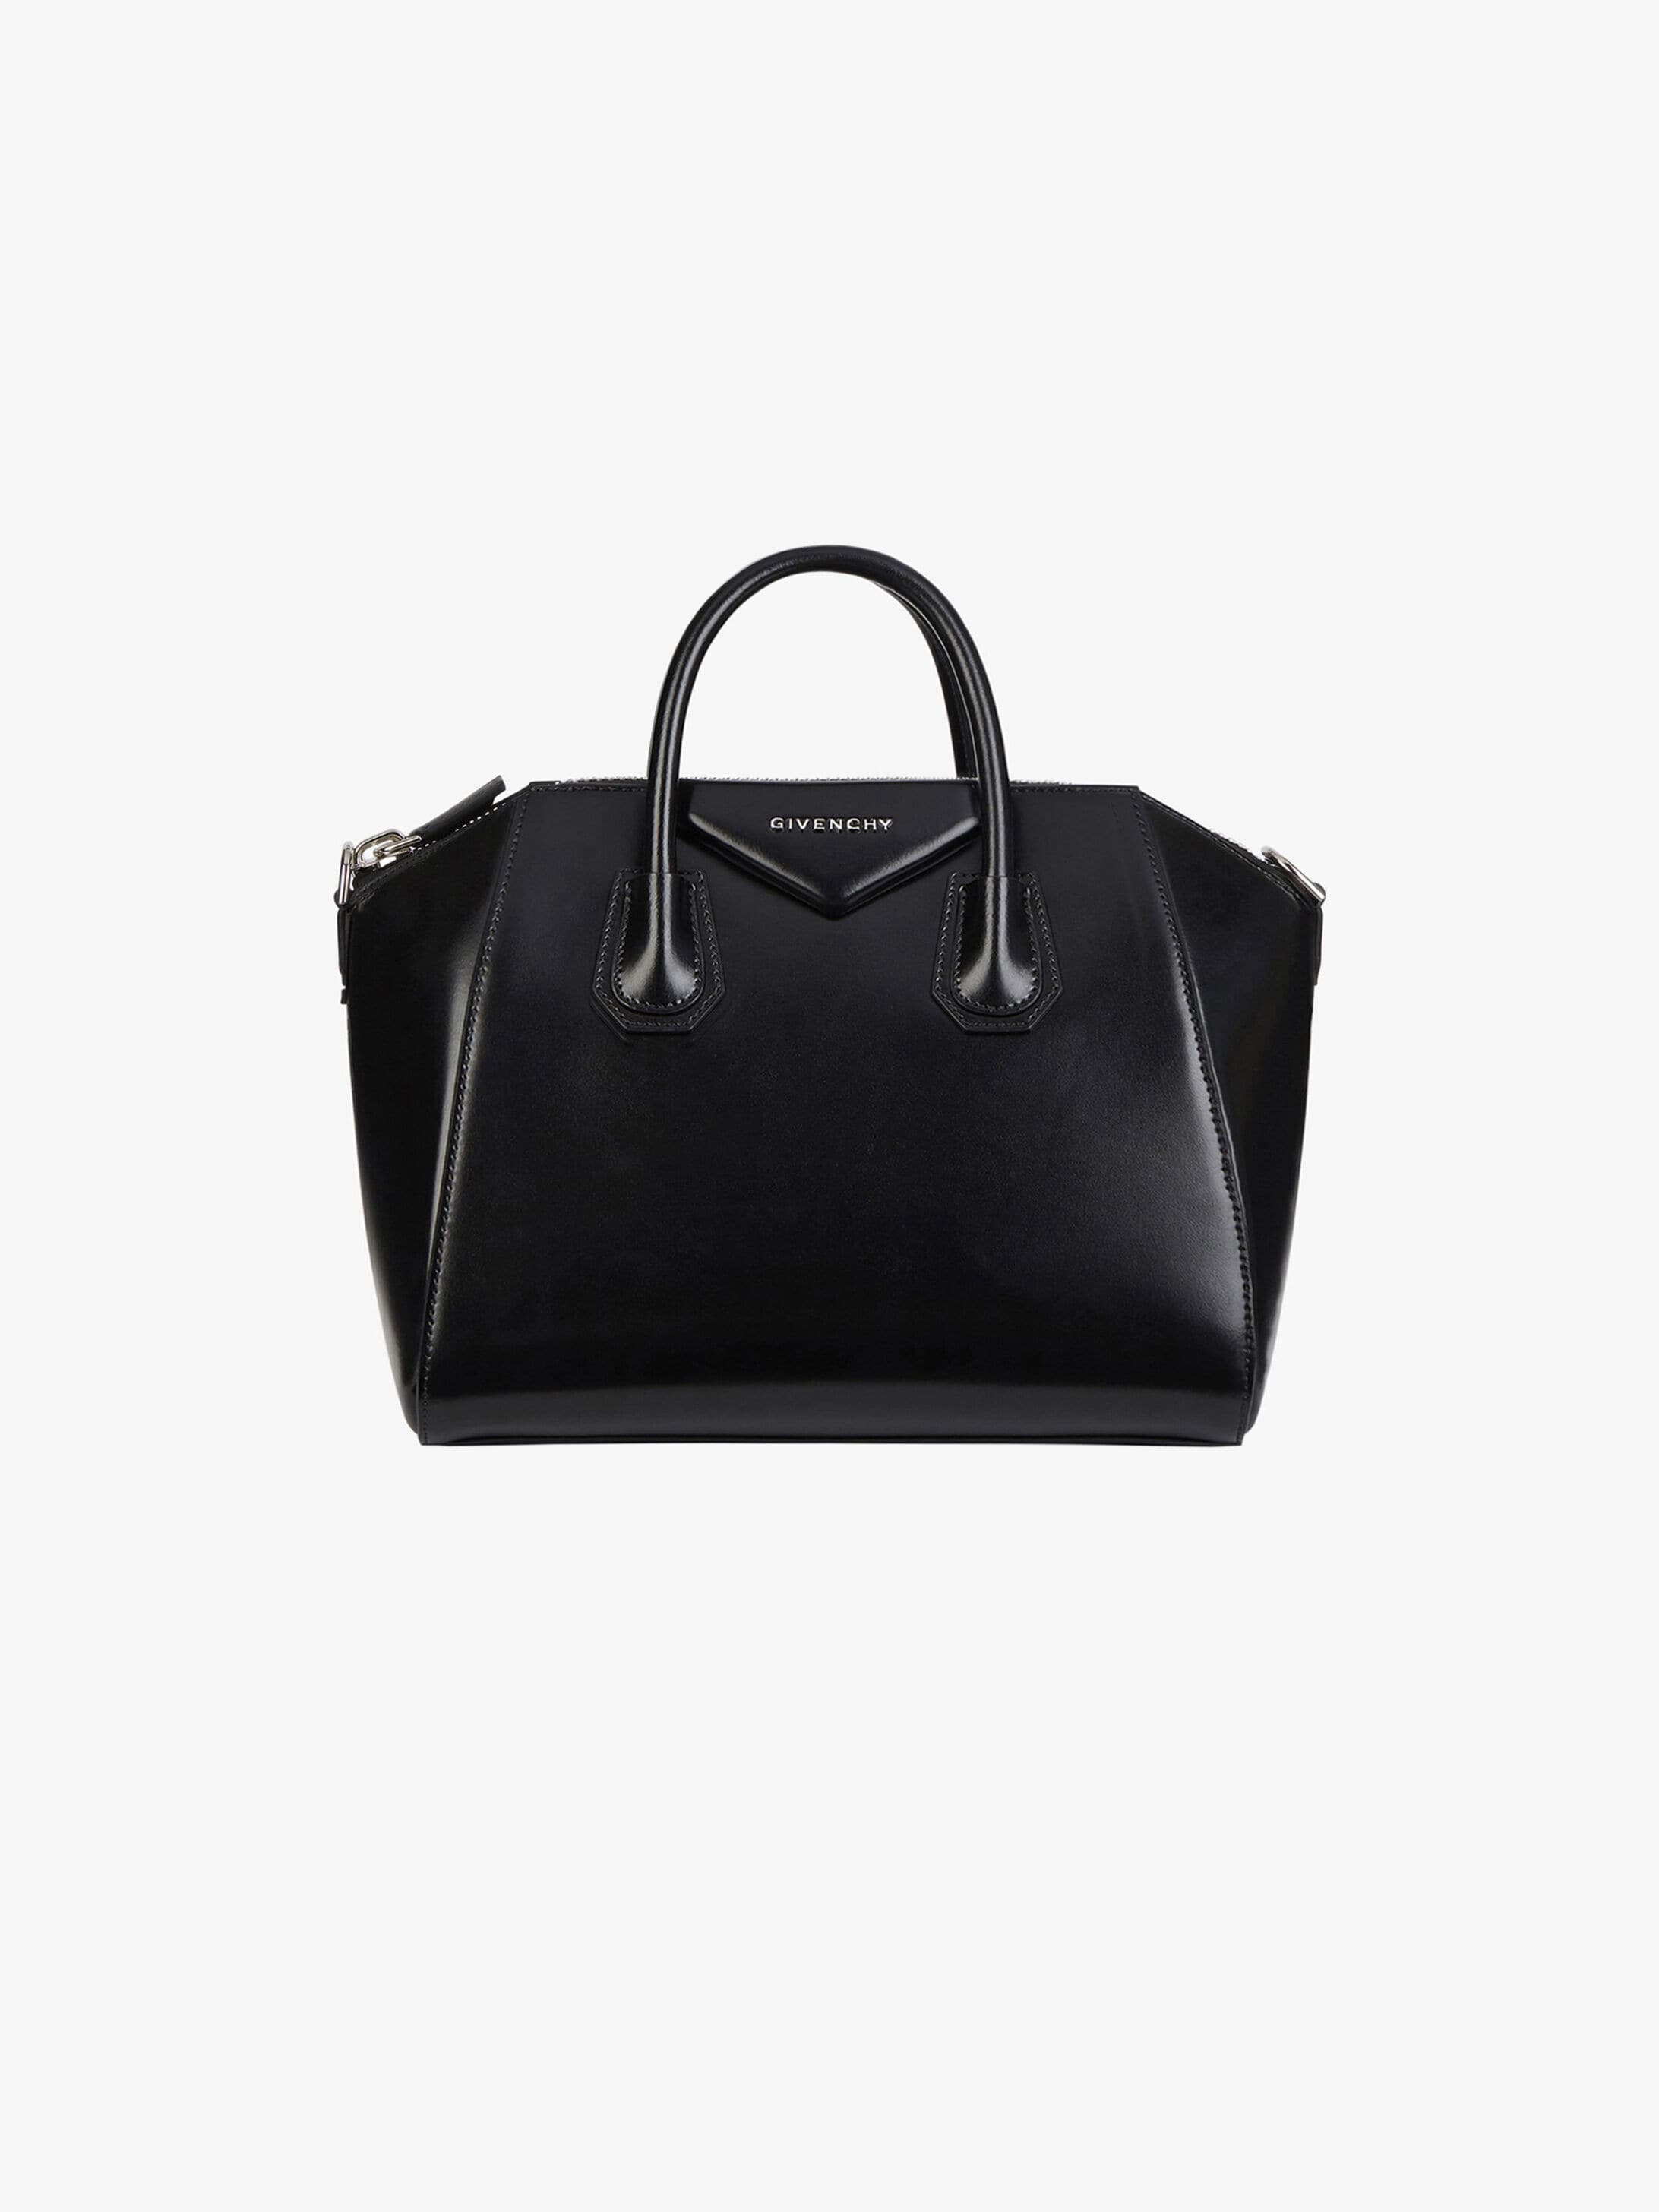 givenchy bags price list